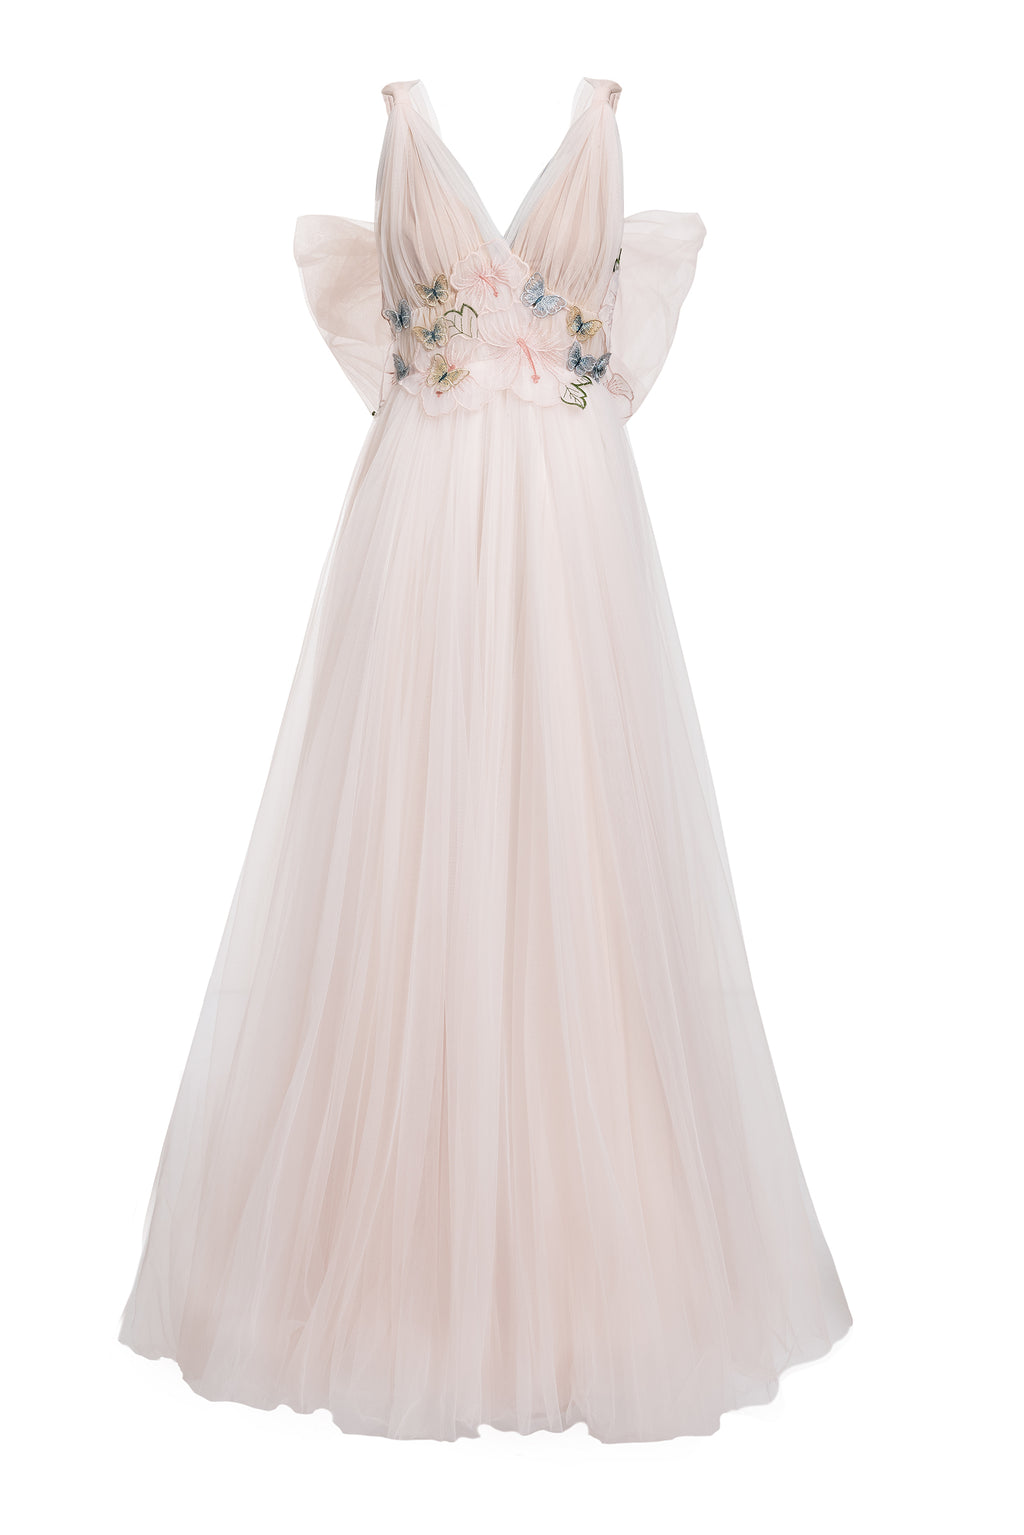 Adeline Gown Soft Pink